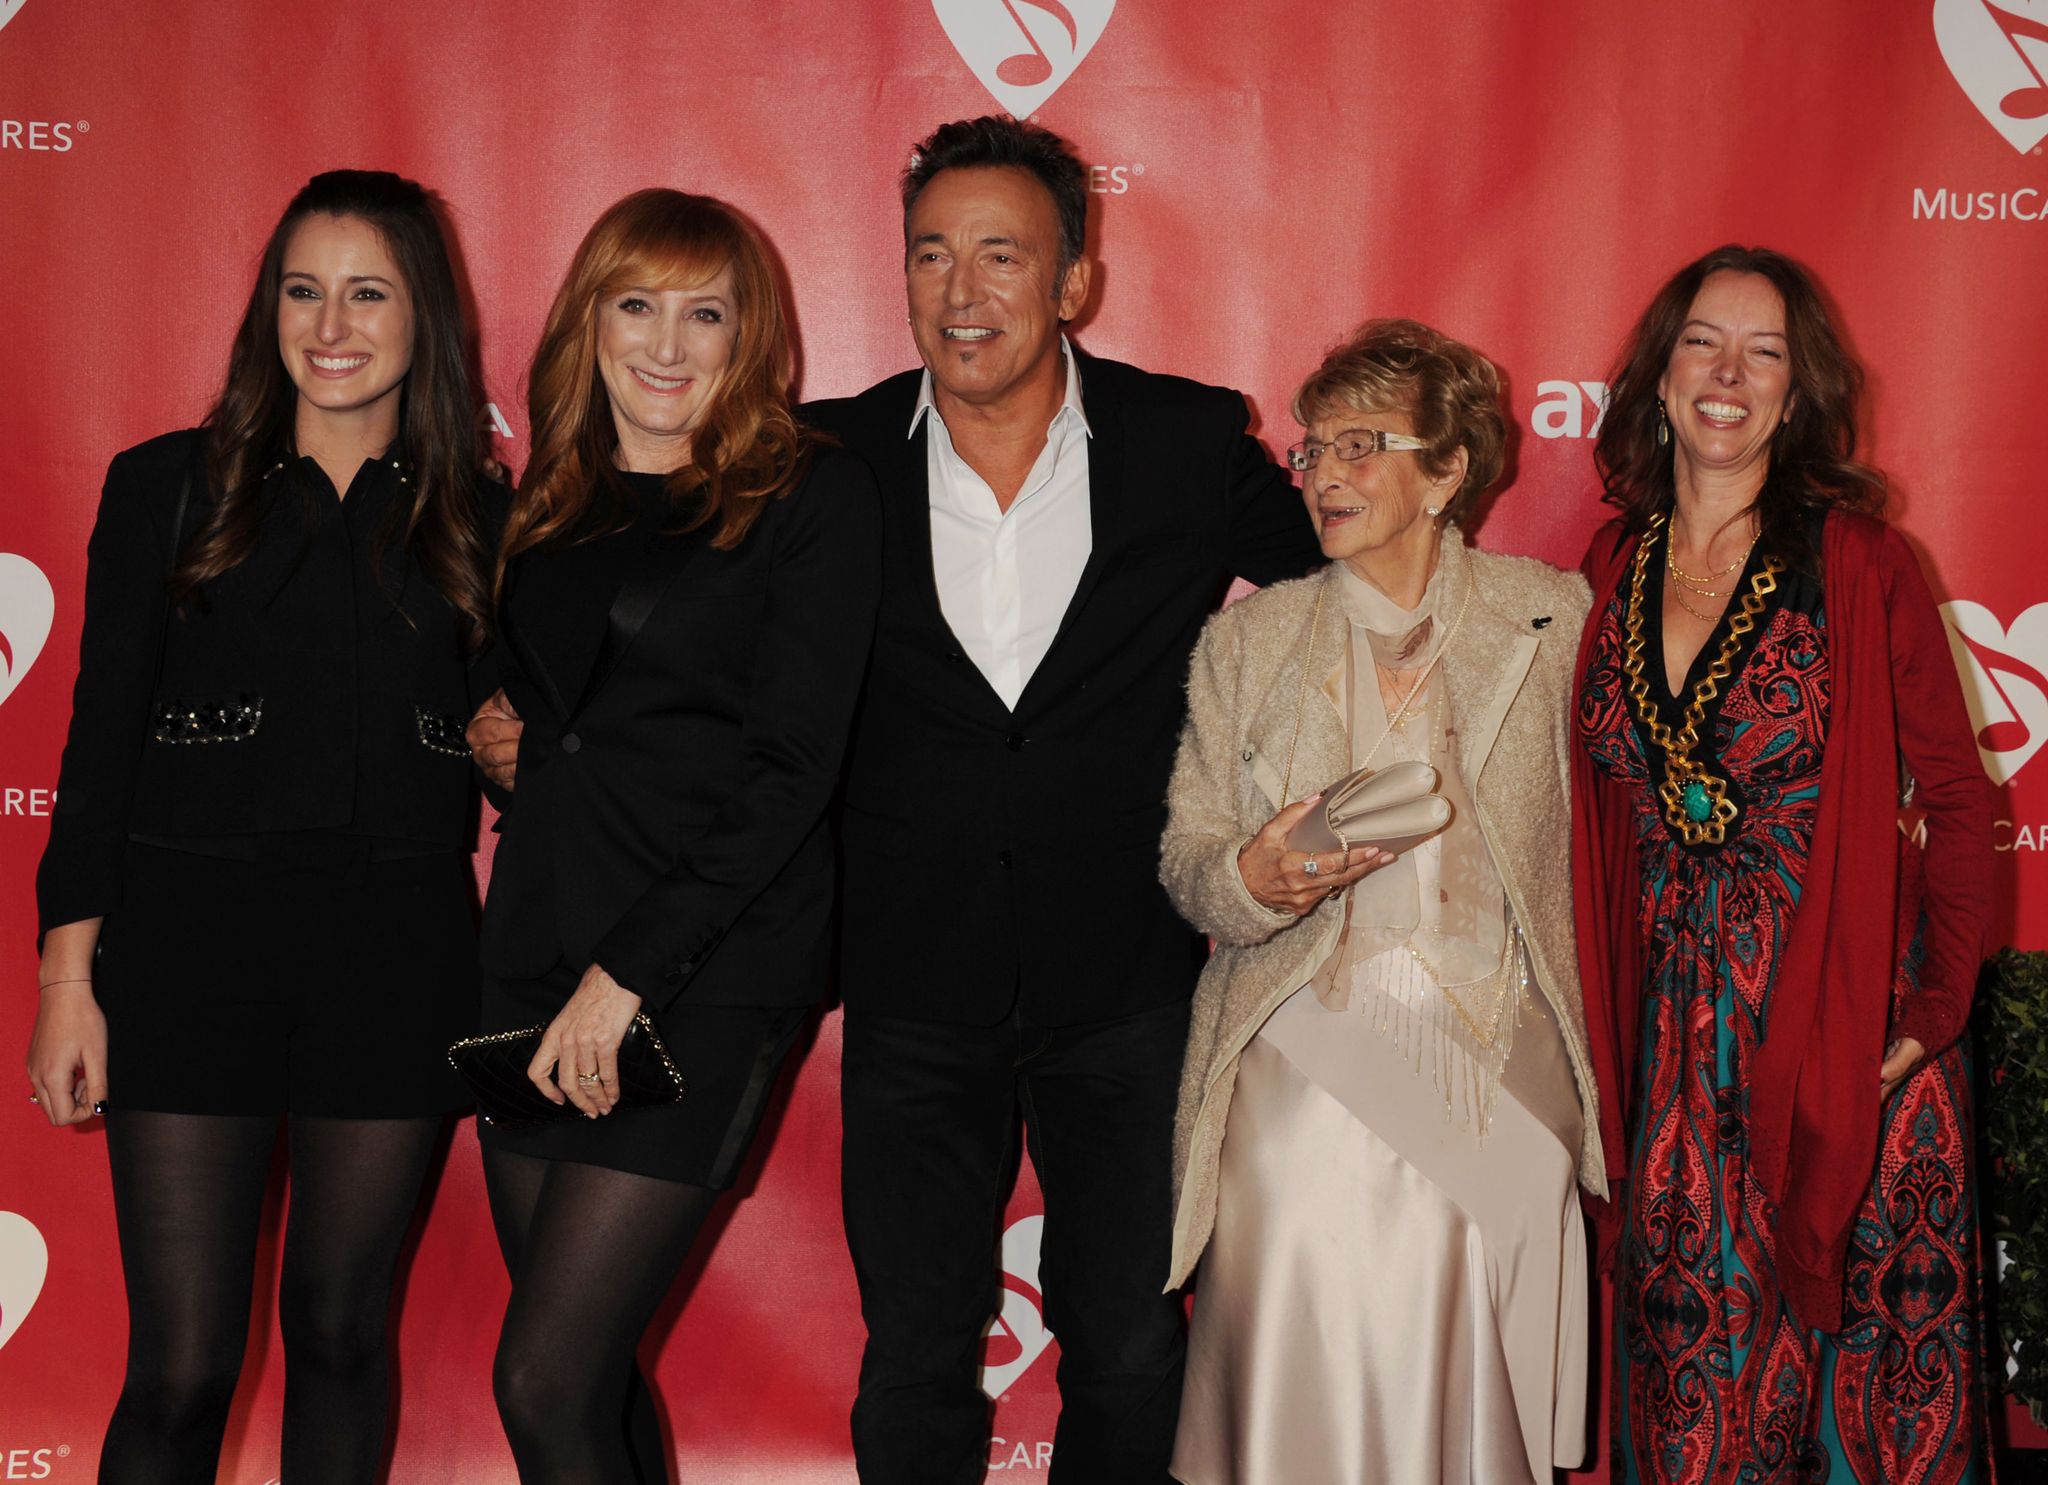 Jessica Rae Springsteen, Patti Scialfa, Bruce Springsteen, Adele Springsteen and Pamela Springsteen during the 2013 MusiCares Person of the Year at Los Angeles Convention Center on February 8, 2013, in Los Angeles, California. | Source: Getty Images